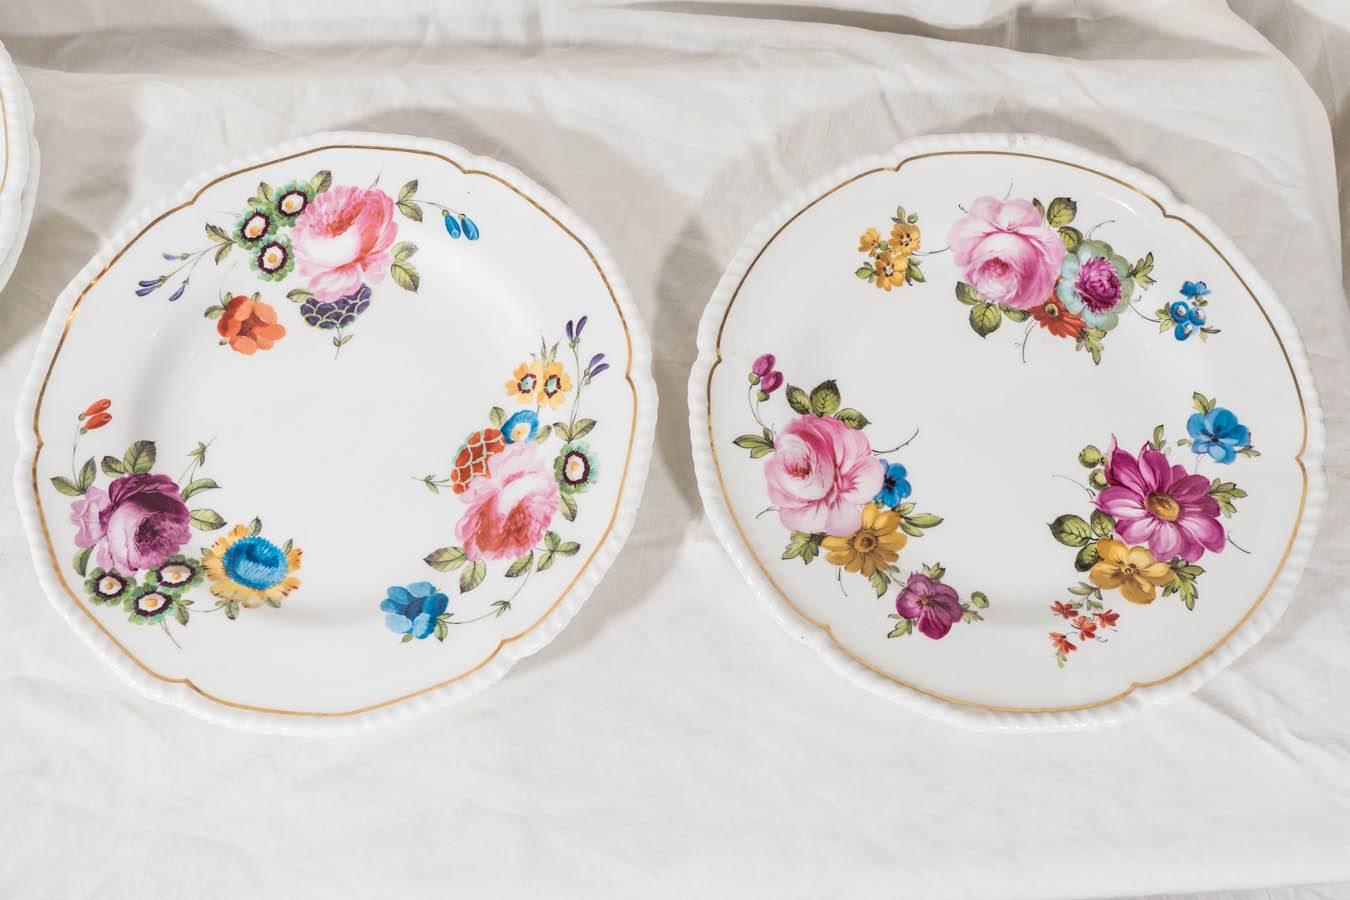 19th Century Antique Porcelain Dishes Each Hand-Painted with Roses on White Porcelain